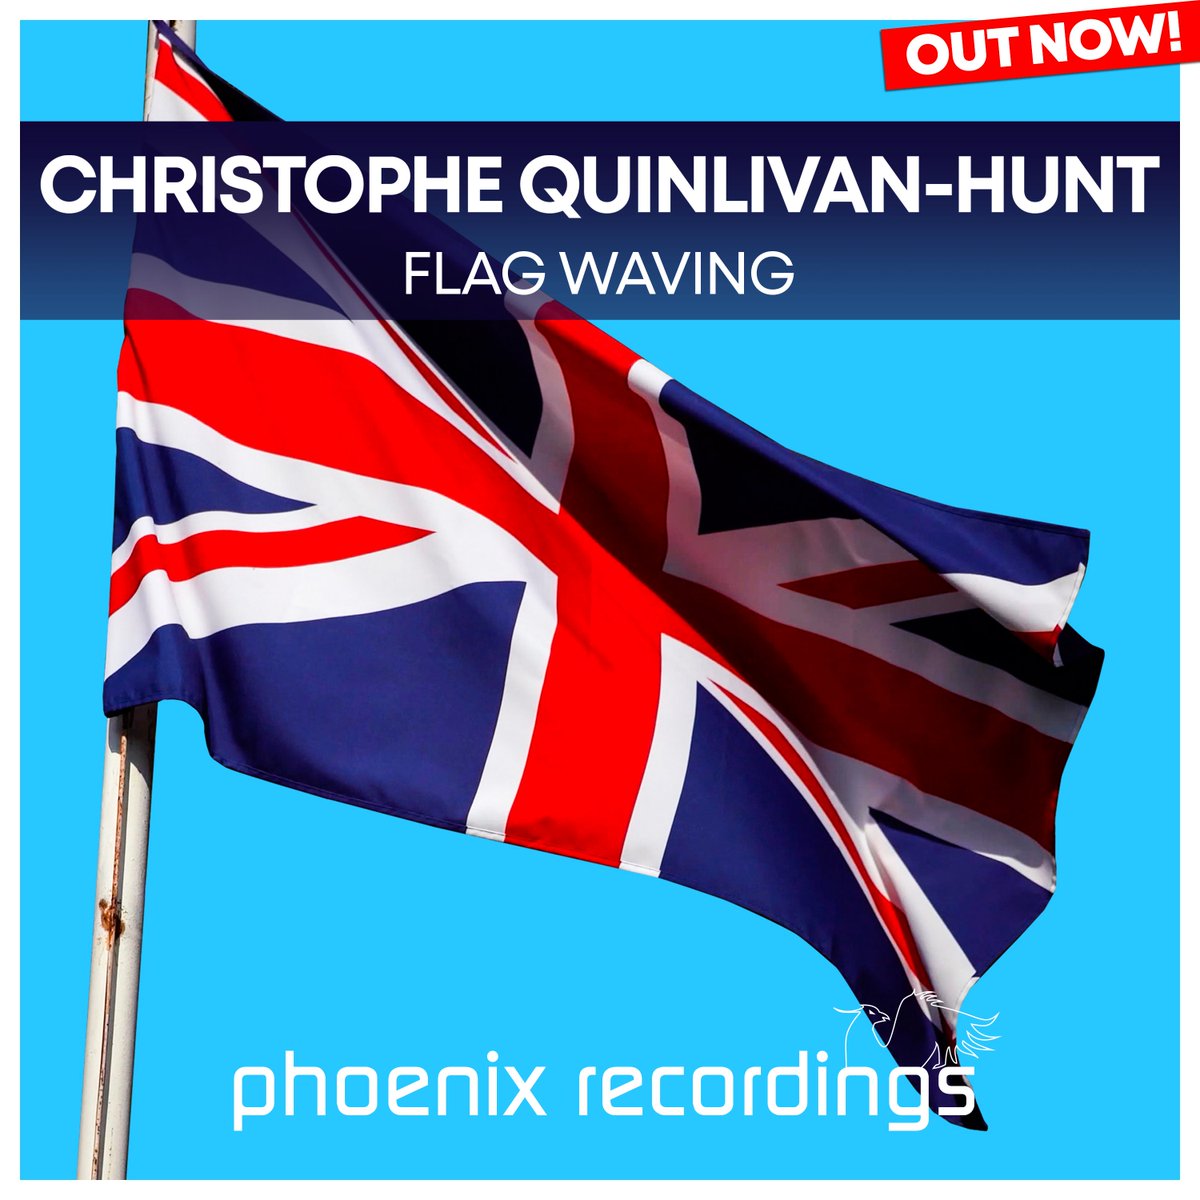 🆕 @QuinlivanHunt « Flag Waving » 🇬🇧
🎧 Beatport exclusive #OutNow
👉 NIX.lnk.to/FlagWaving

Sheffield residentChristophe Quinlivan-Hunt - Minister for Trance & Techno joins the family with his label debut #FlagWaving, an energetic #UpliftingTrance production par excellence.